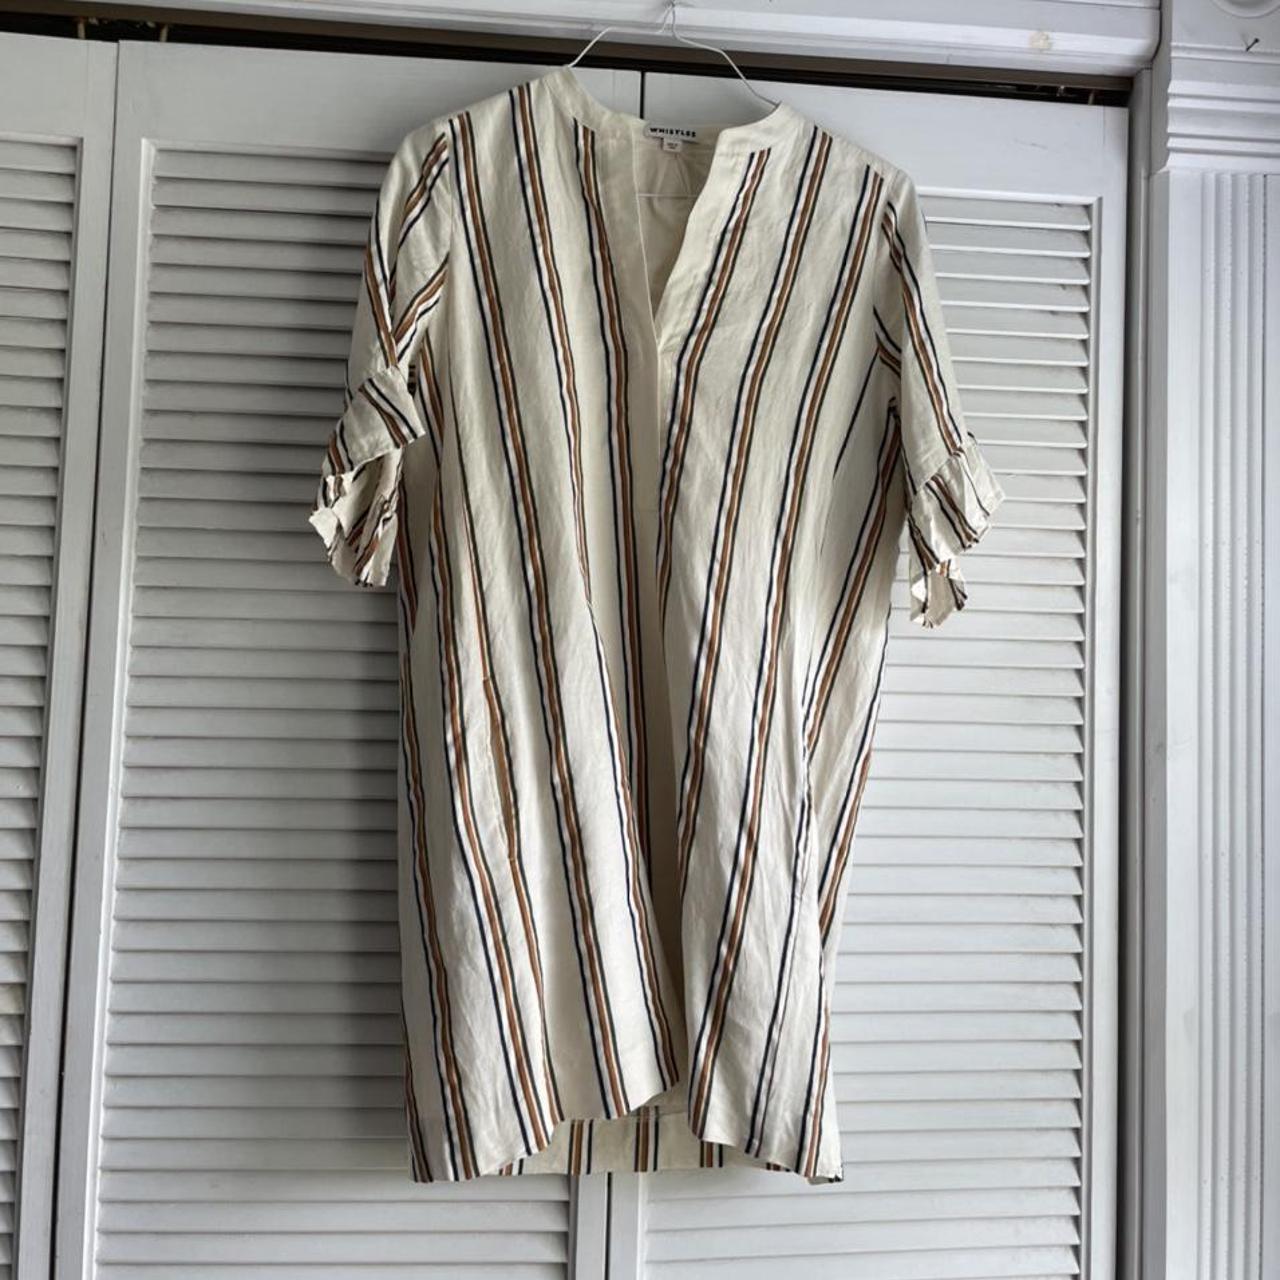 Product Image 3 - Whistles pinstripe shirt dress.

Stripes are